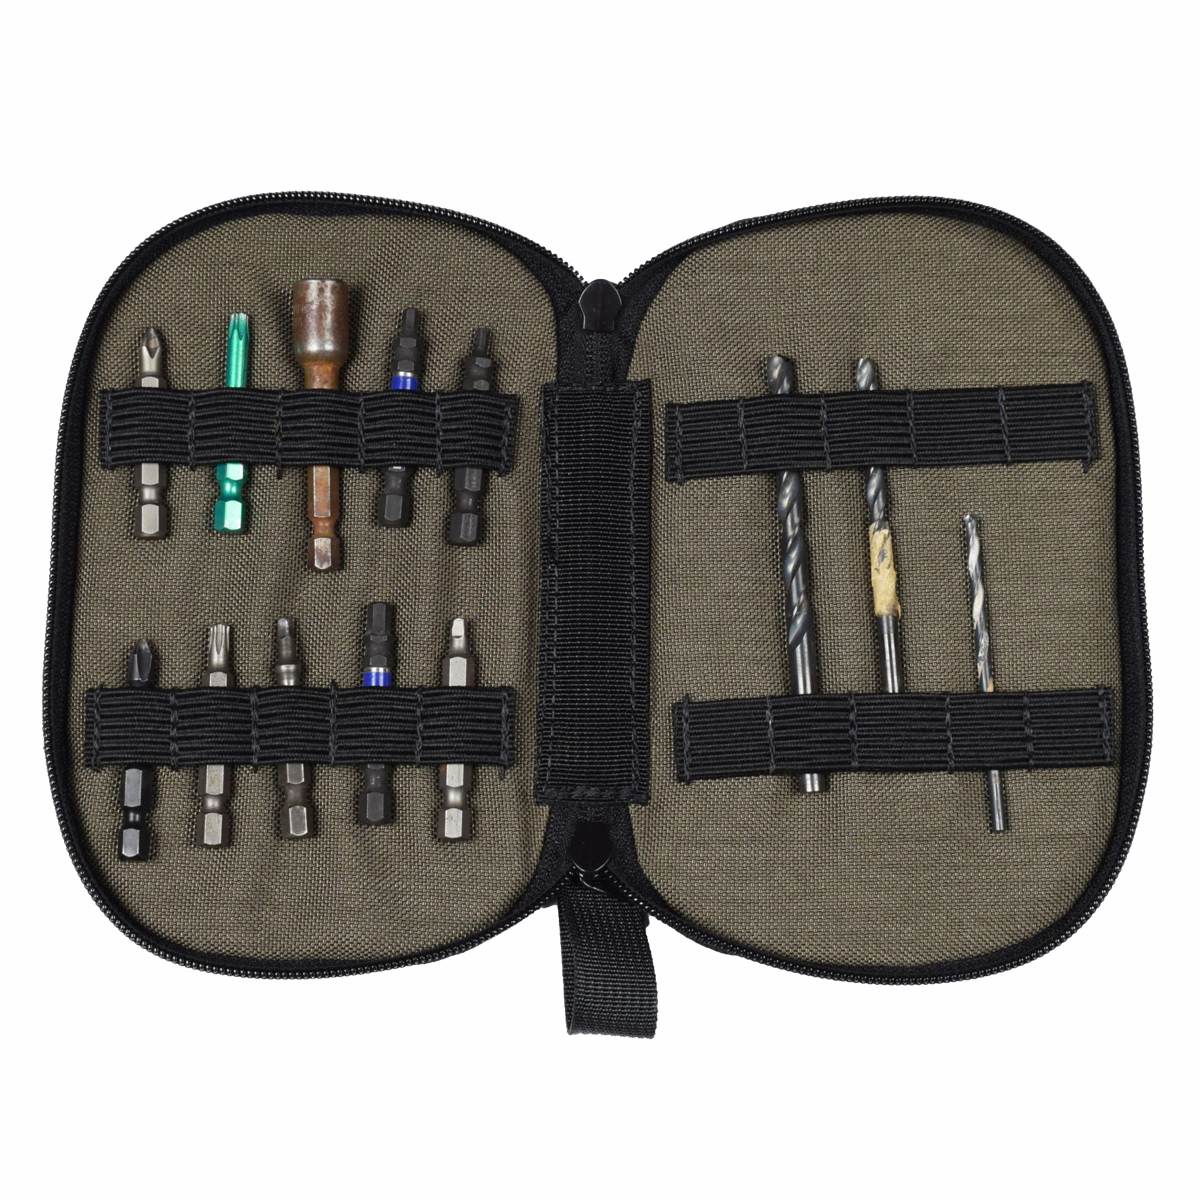 DiamondBack Driver/ Drill bit case - Shop yours at Top Class Gears / SIG Tools today. 